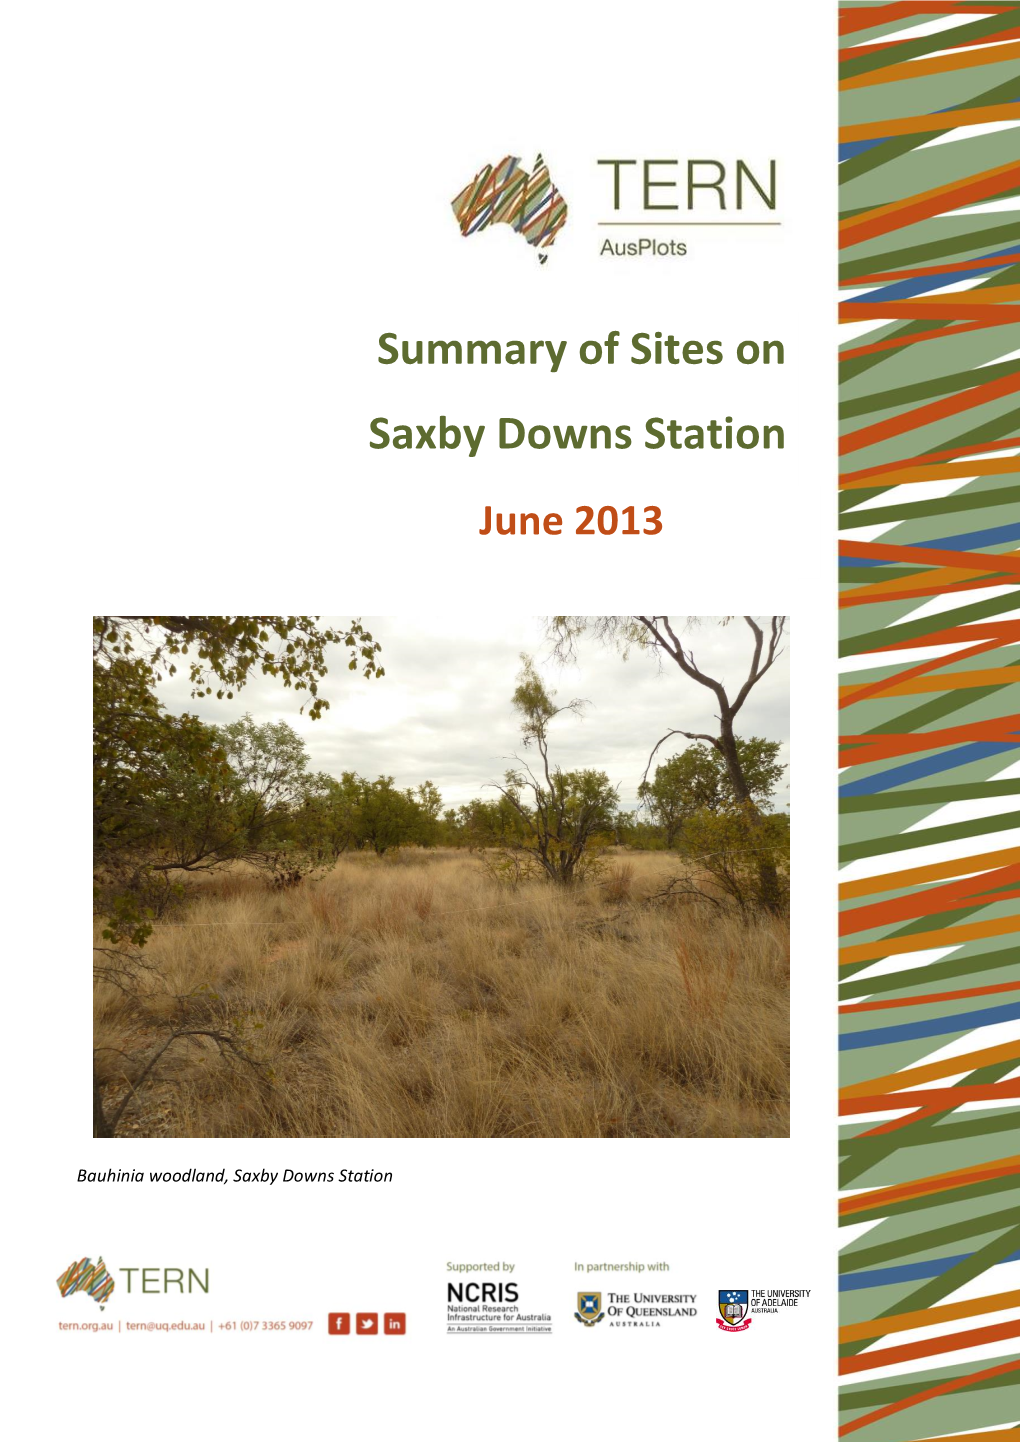 Summary of Sites on Saxby Downs Station